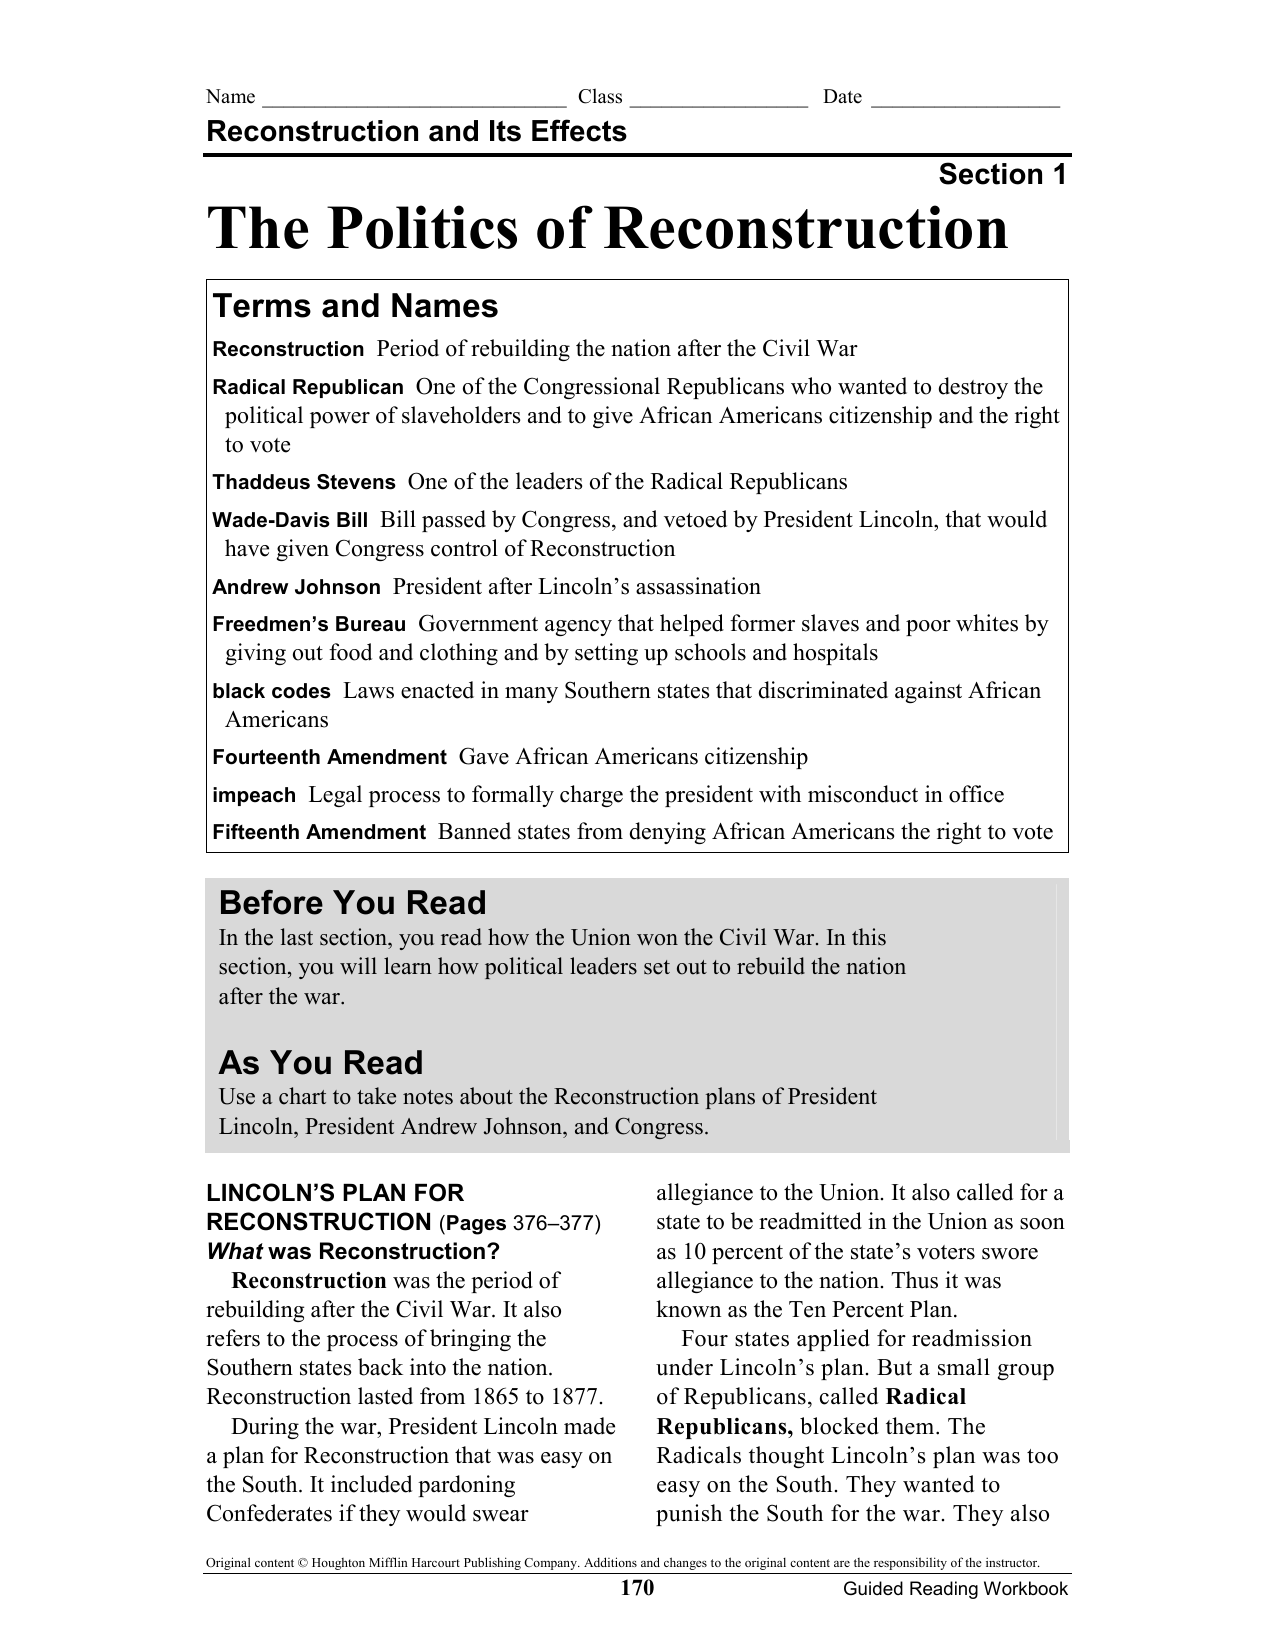 Presidential And Congressional Reconstruction Plans Chart Answers